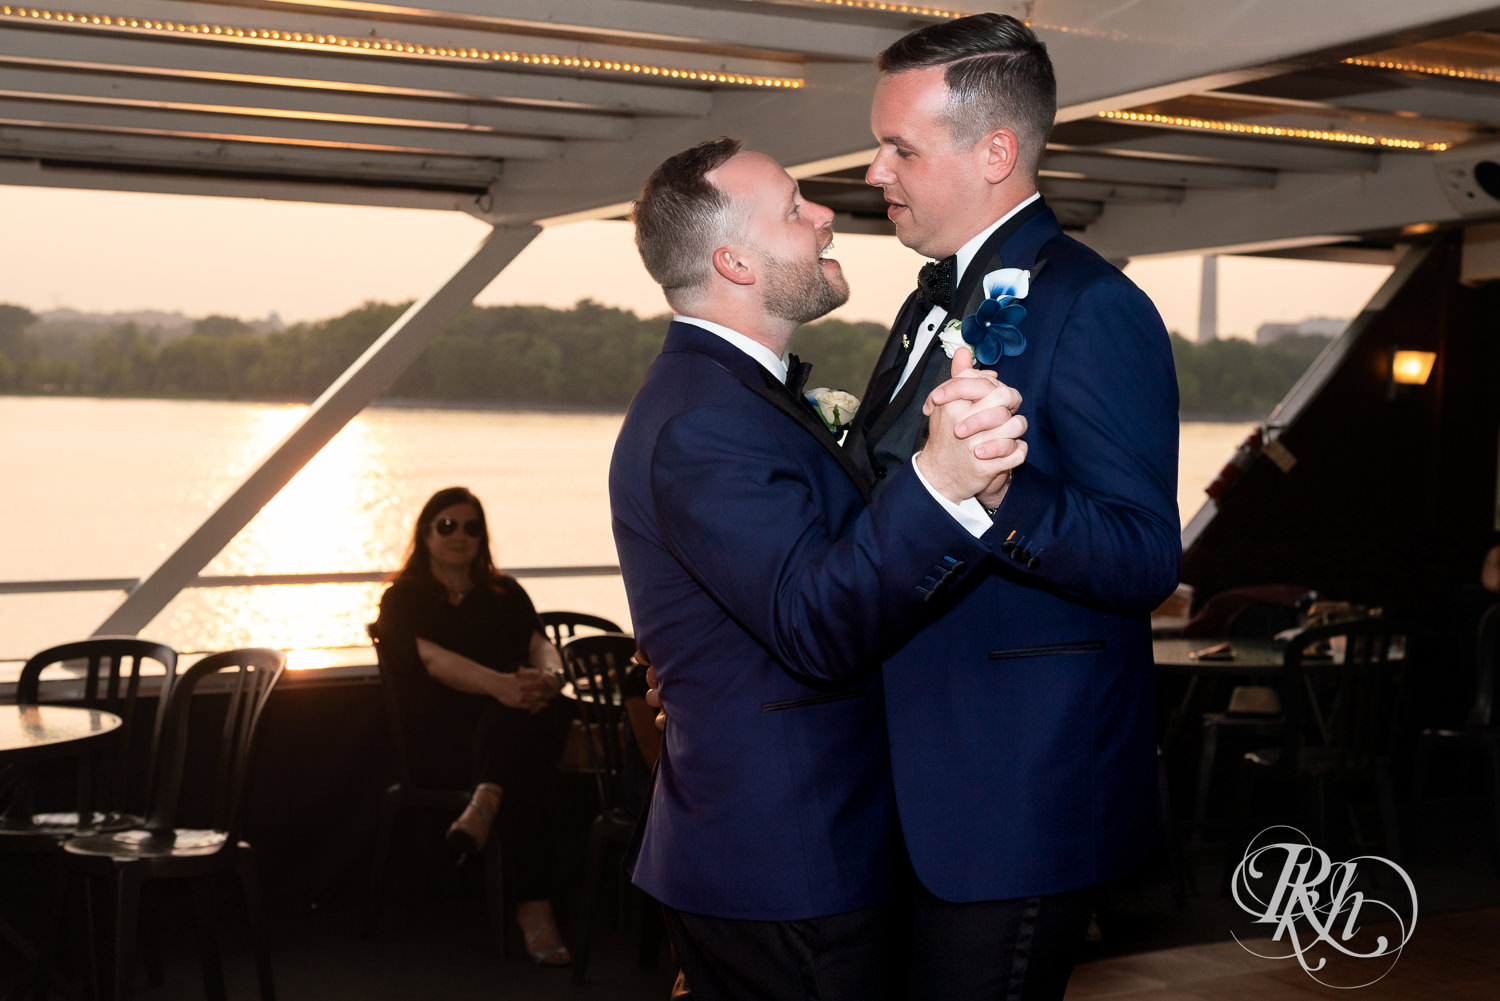 Grooms dance during wedding reception on the Majestic Star by Stillwater River Boats in Stillwater, Minnesota.